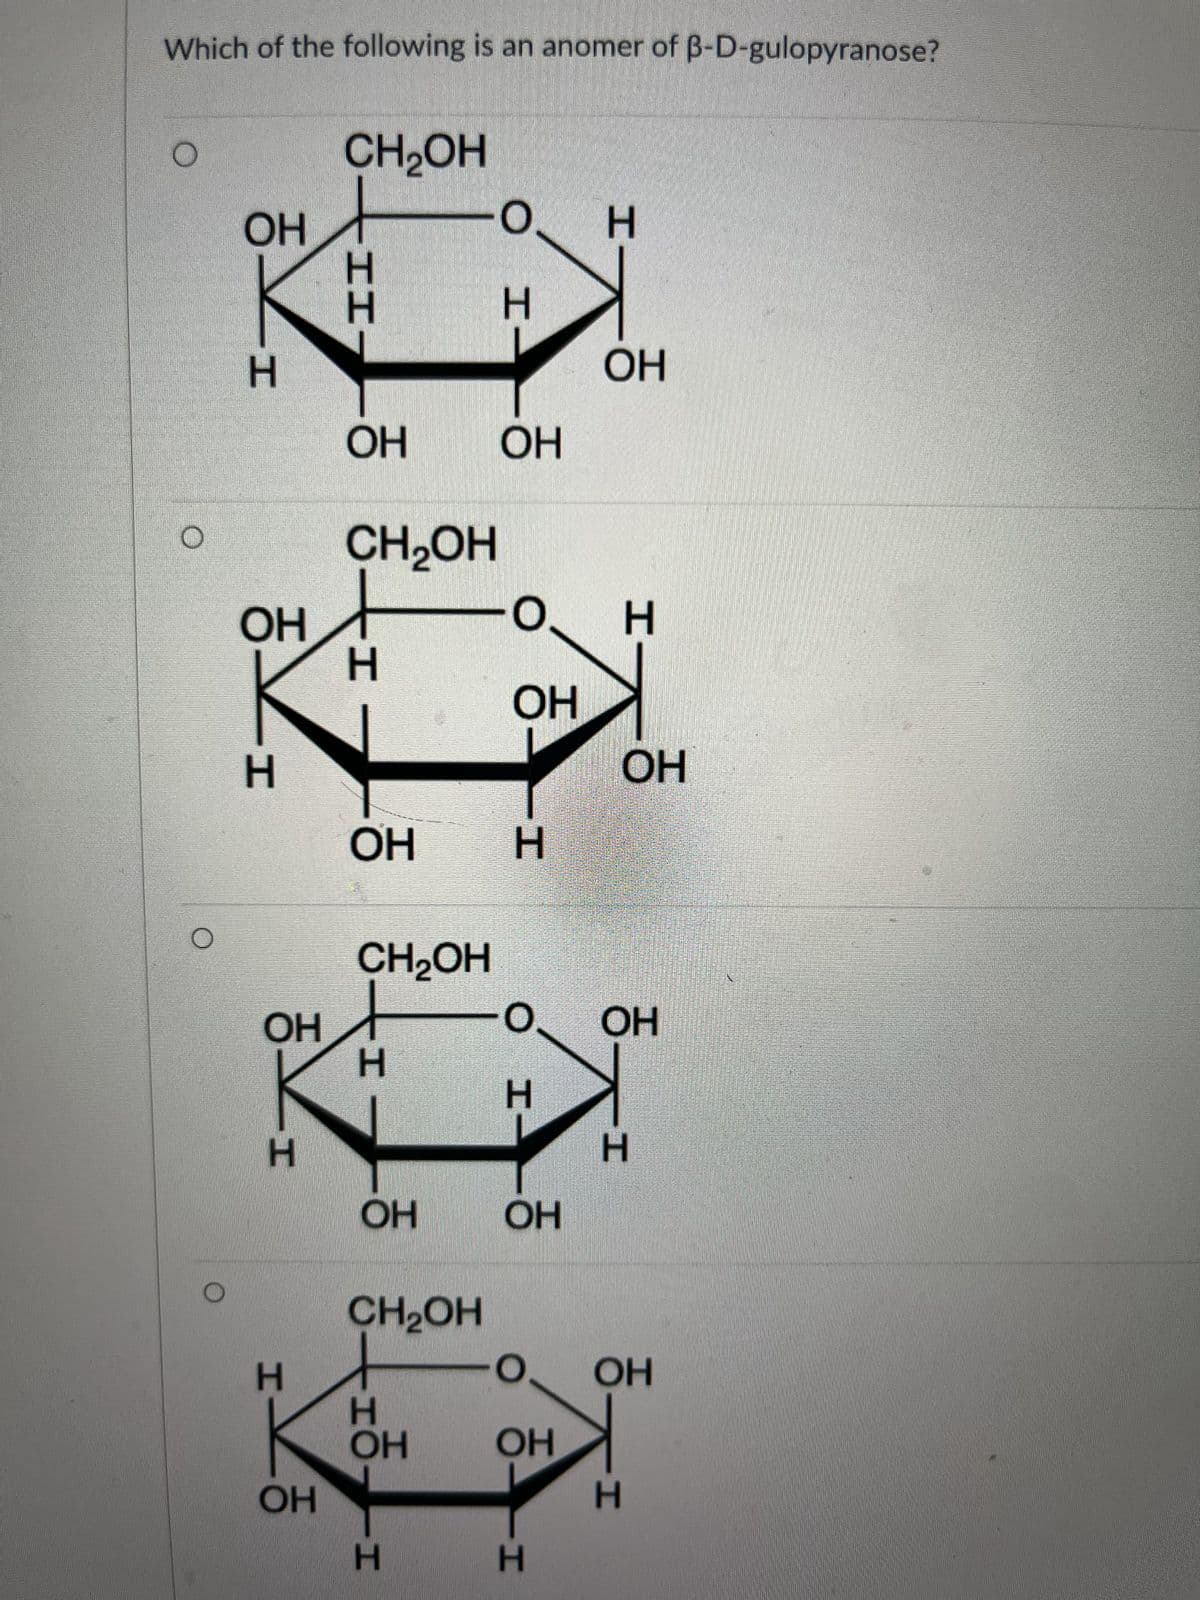 Which of the following is an anomer of B-D-gulopyranose?
O
O
го
ОН
H
ОН
H
ОН
H
H
ОН
CH₂OH
-II-
H
H
ОН ОН
CH2OH
H
ОН
ОН
CH2OH
О
0.
H
CH2OH
то
Н
H
H
ОН
H
H
- о H
ОН
ОН
H
ОН
H
ОН
ОН
H
О ОН
ОН
H
N